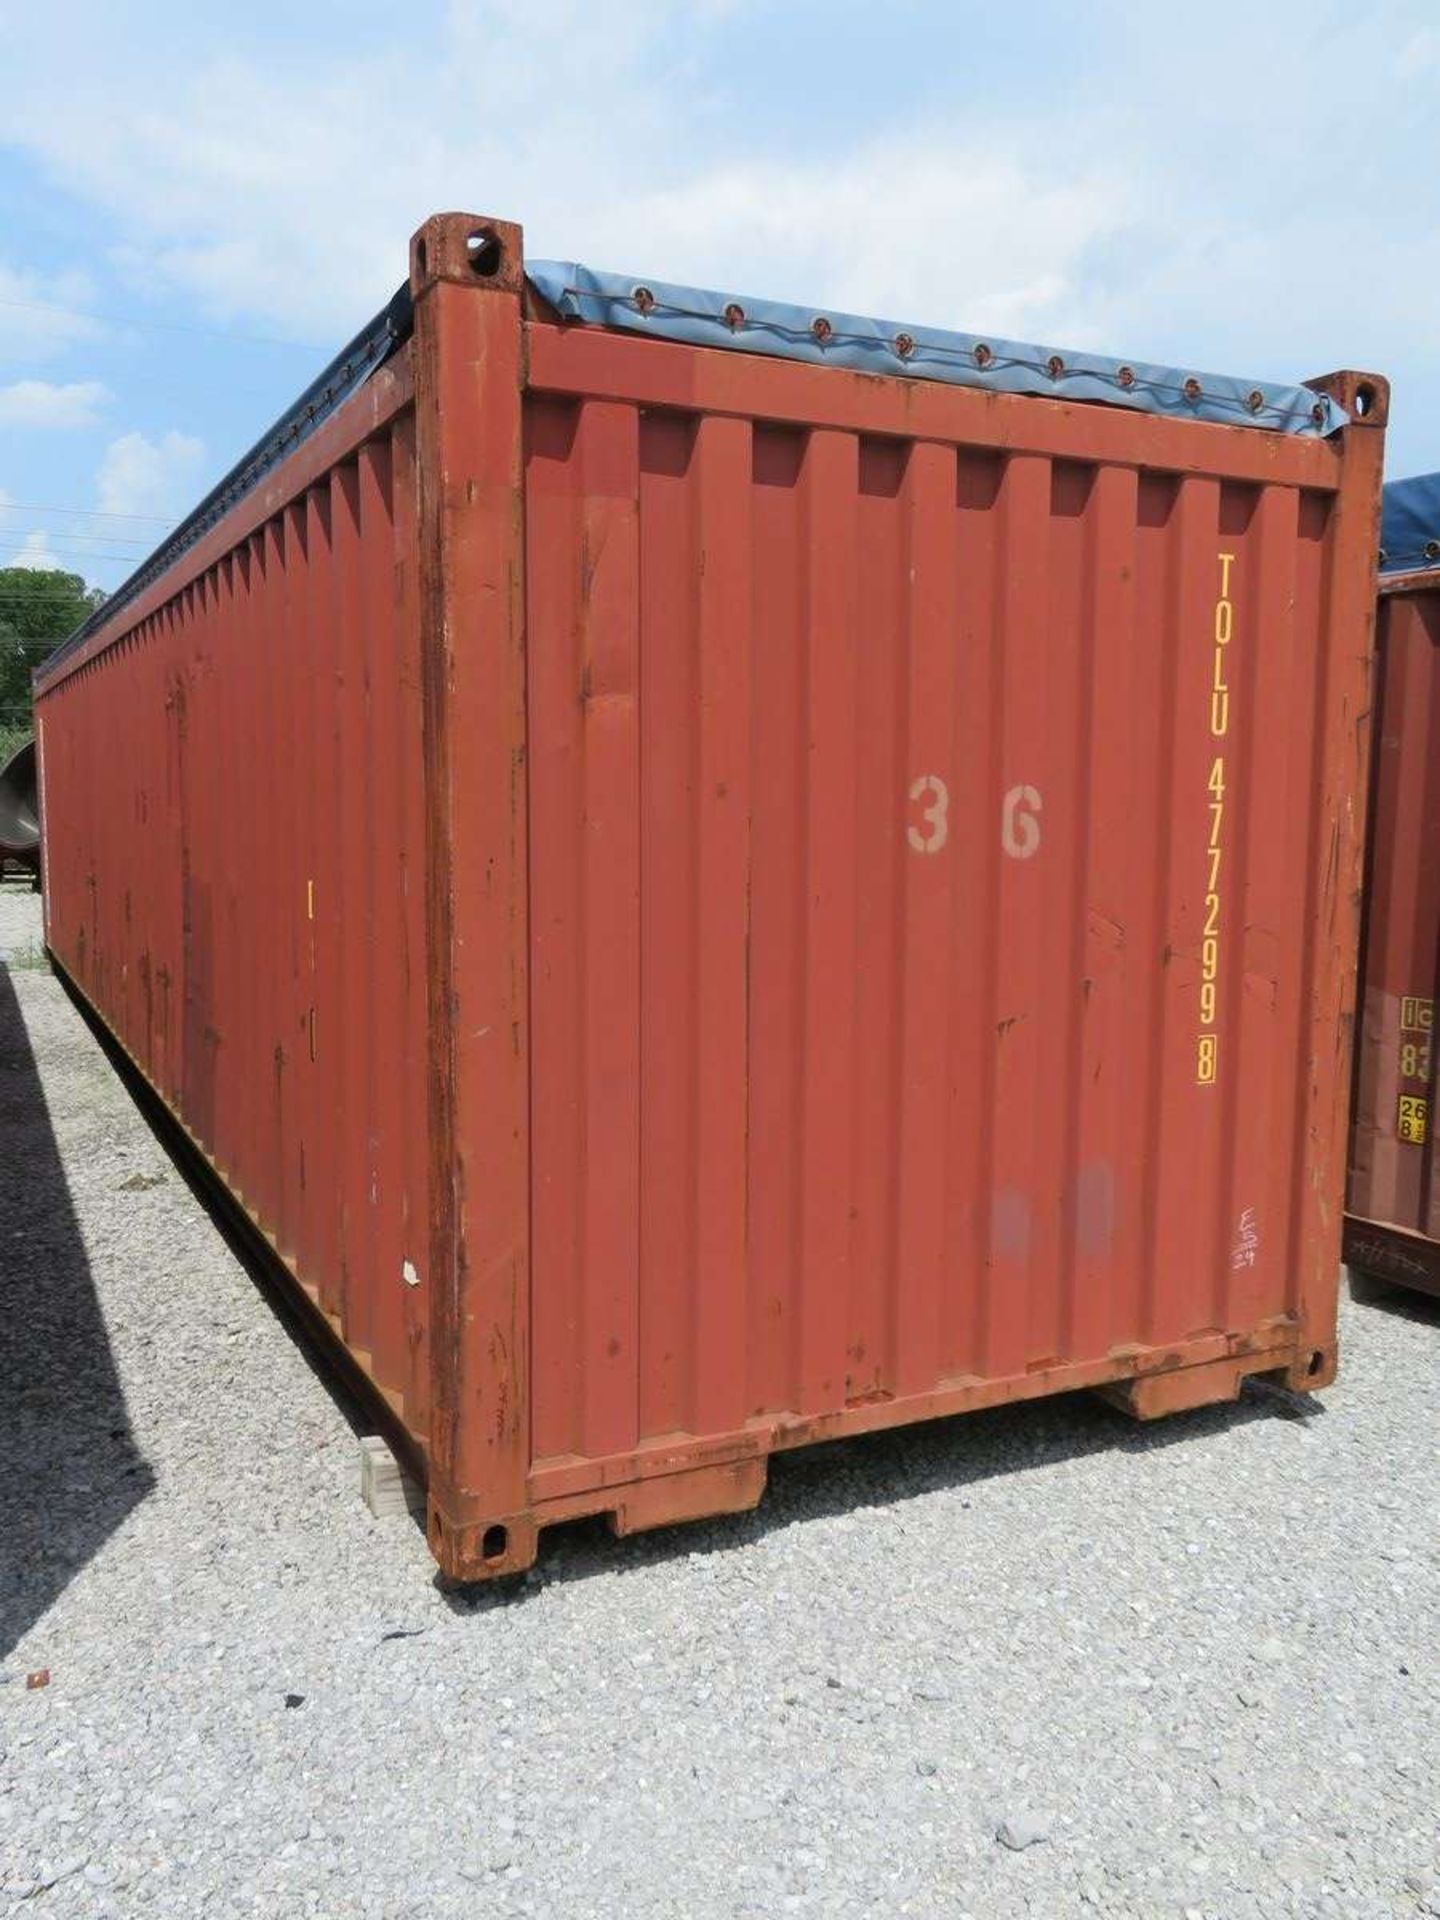 1995 MED MC42-2003-T1 40' Tarp Top Shipping Container - Image 2 of 2